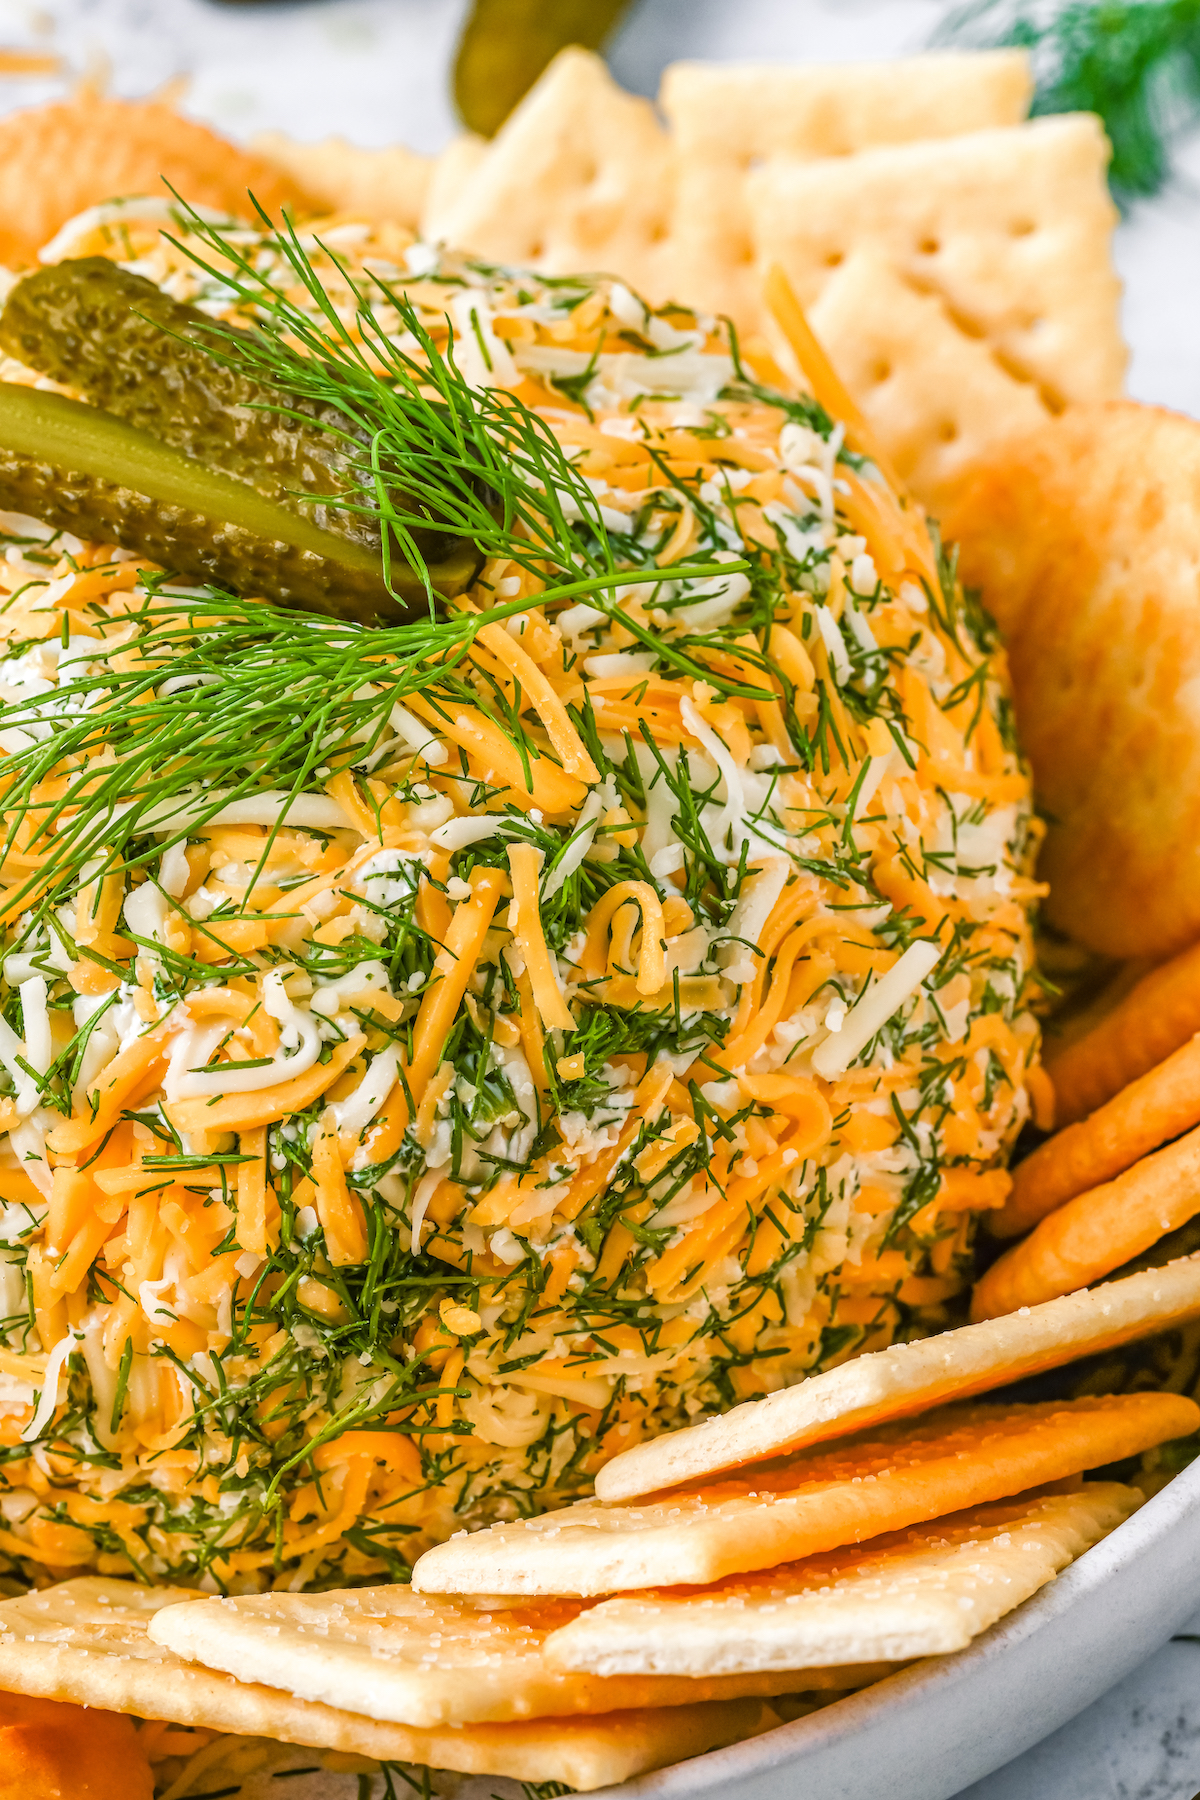 Close-up shot of a cheese ball appetizer coated in shredded cheese and herbs.